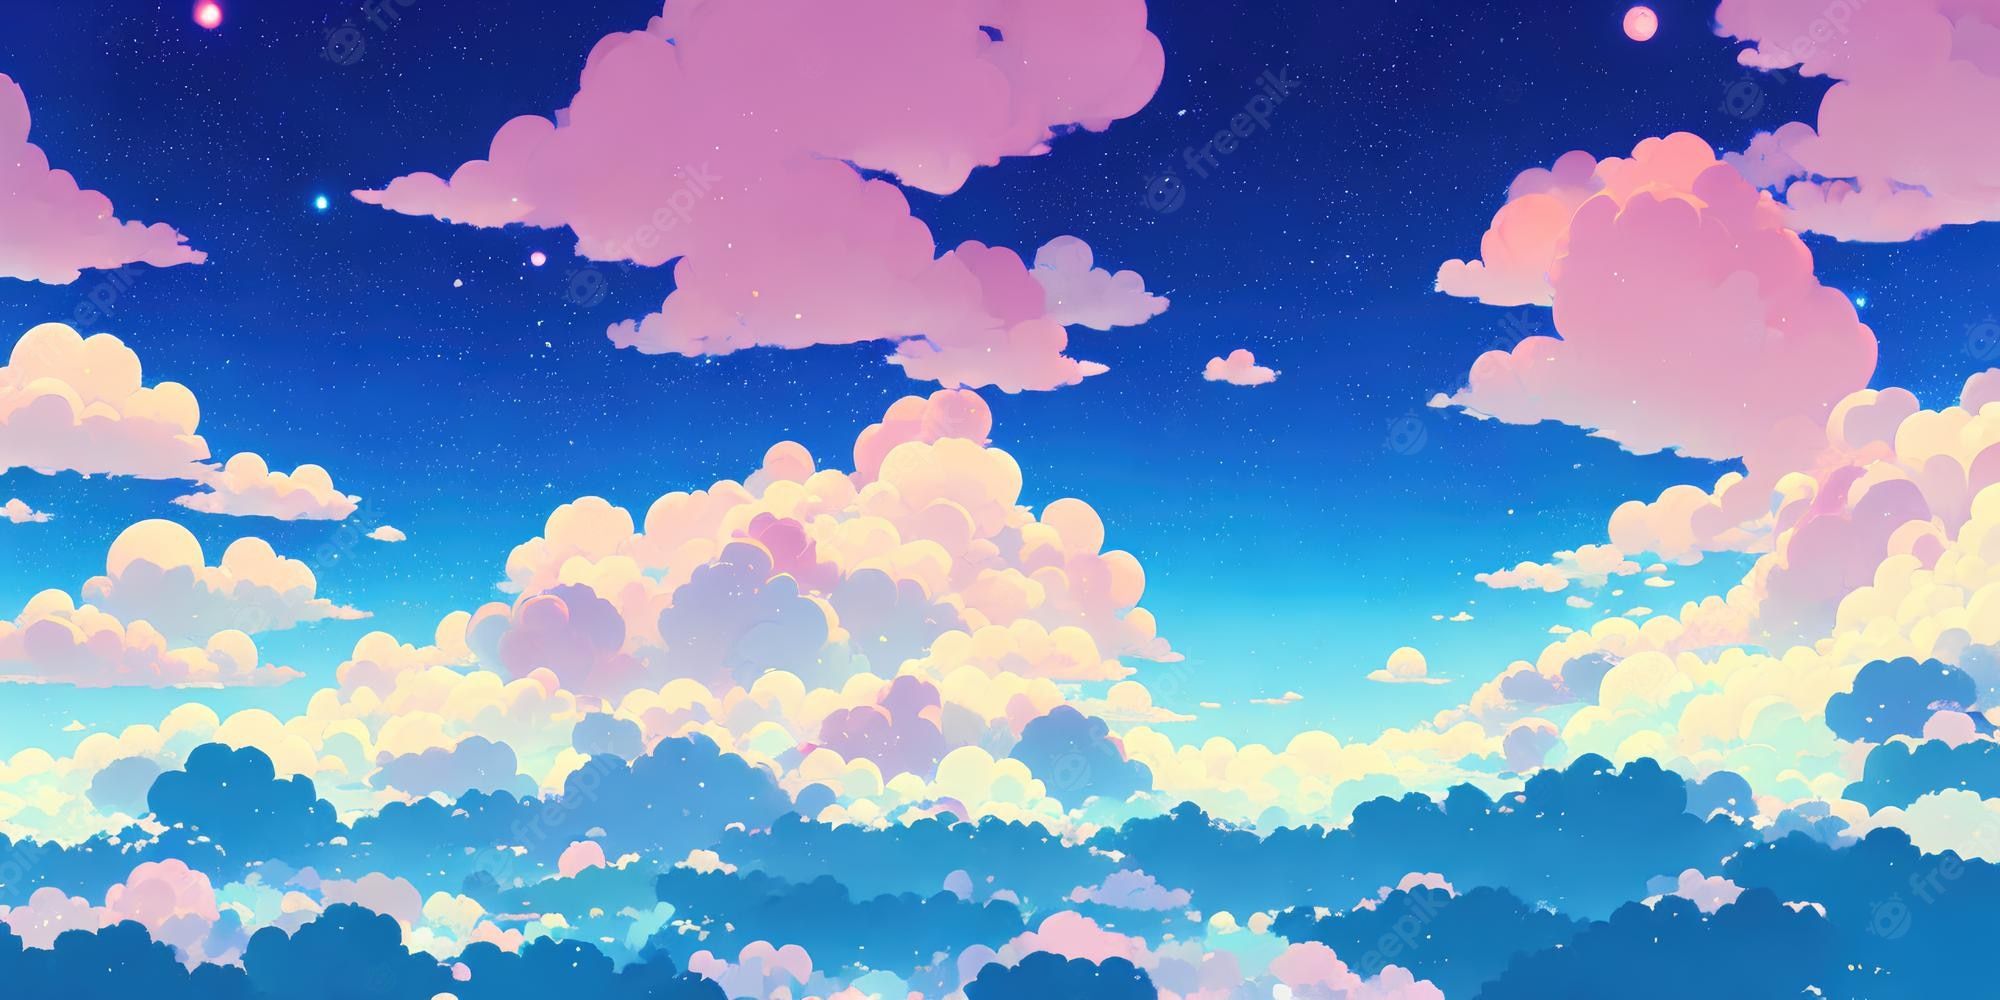 A sky with clouds and trees in the background - Anime landscape